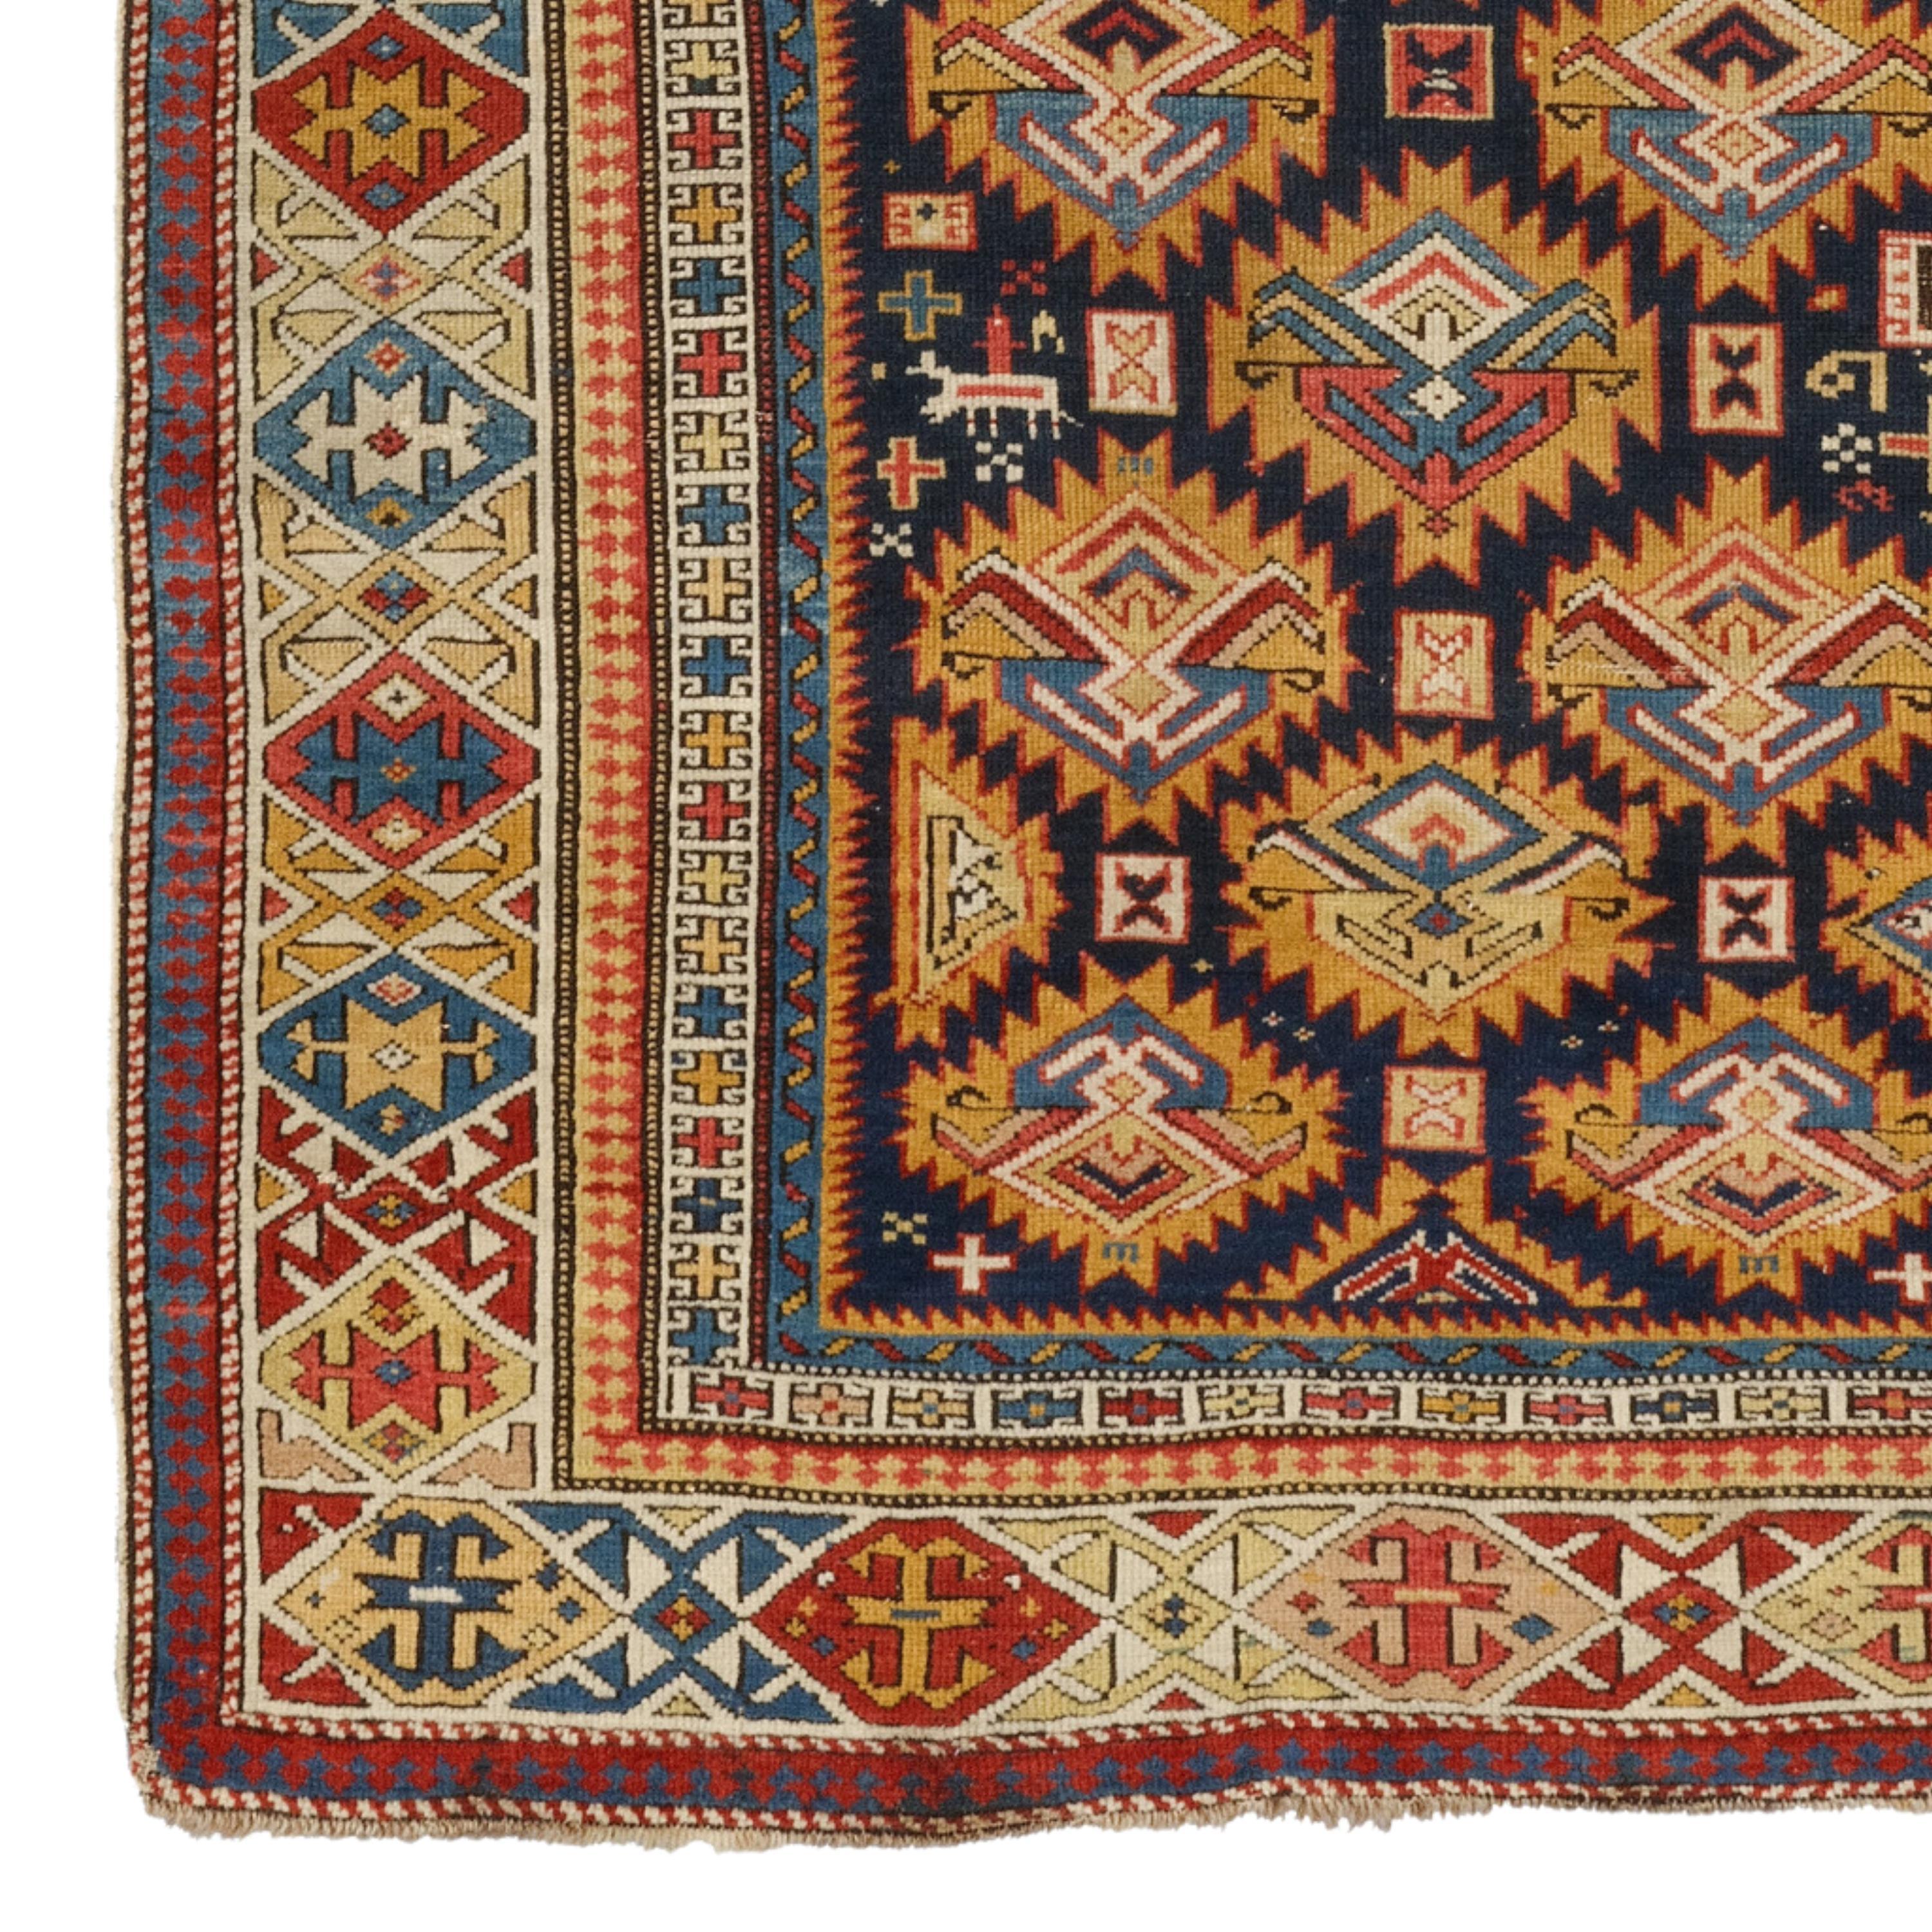 Antique Shirvan Rug
Third Quarter Of The 19th Century Caucasian Shirvan Rug in Good Condition
Size: 115 x 173 cm (45,2x68,1 In)

The Shirvan carpet is a handmade floor covering in the Shirvan region of Azerbaijan in the Southeastern Caucasus.

Many